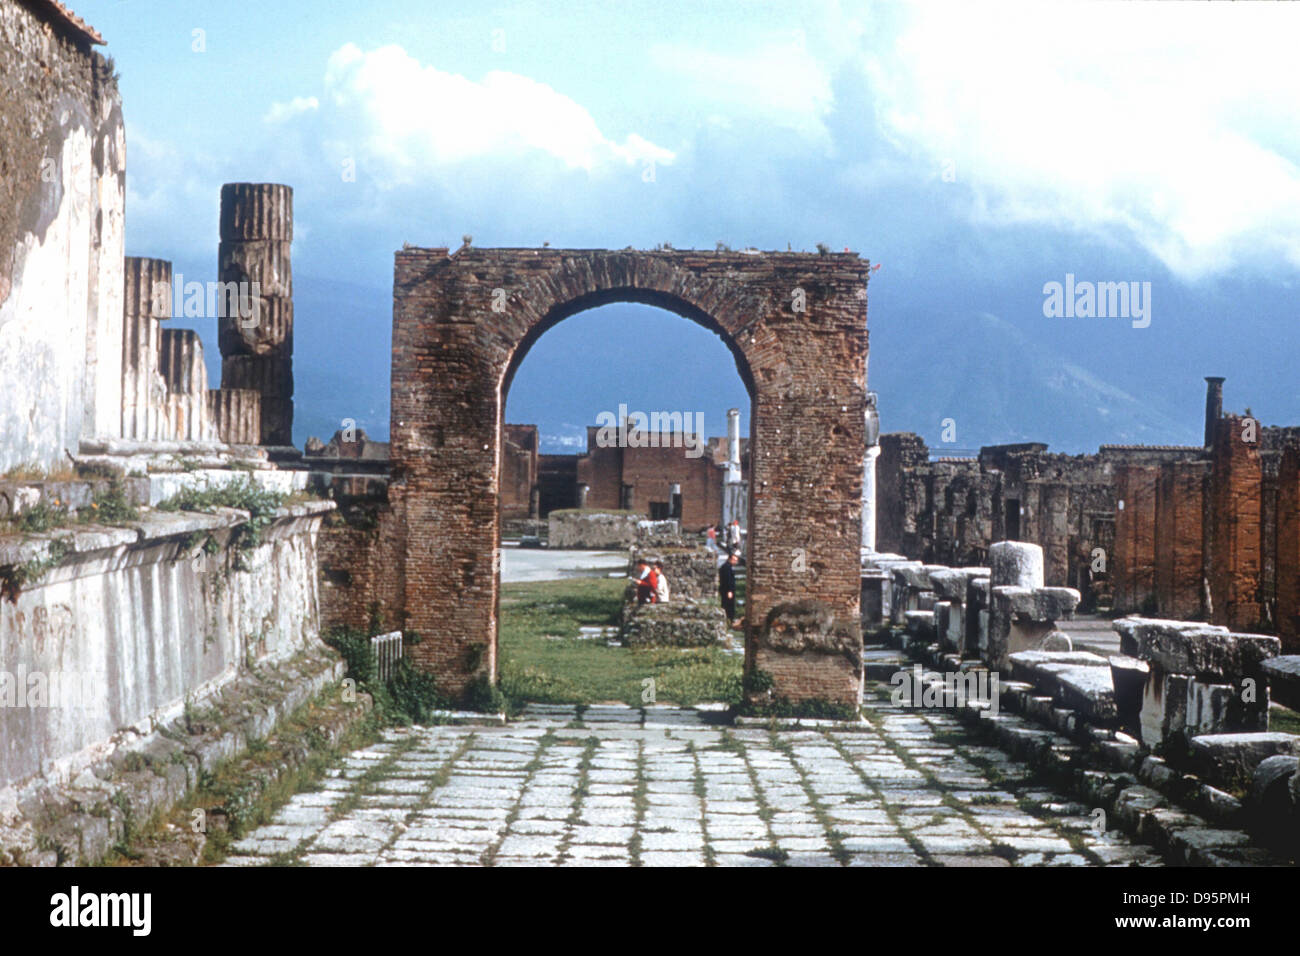 Ancient Rome: Pompeii. Arch and paved walkway. 1st century AD. Stock Photo